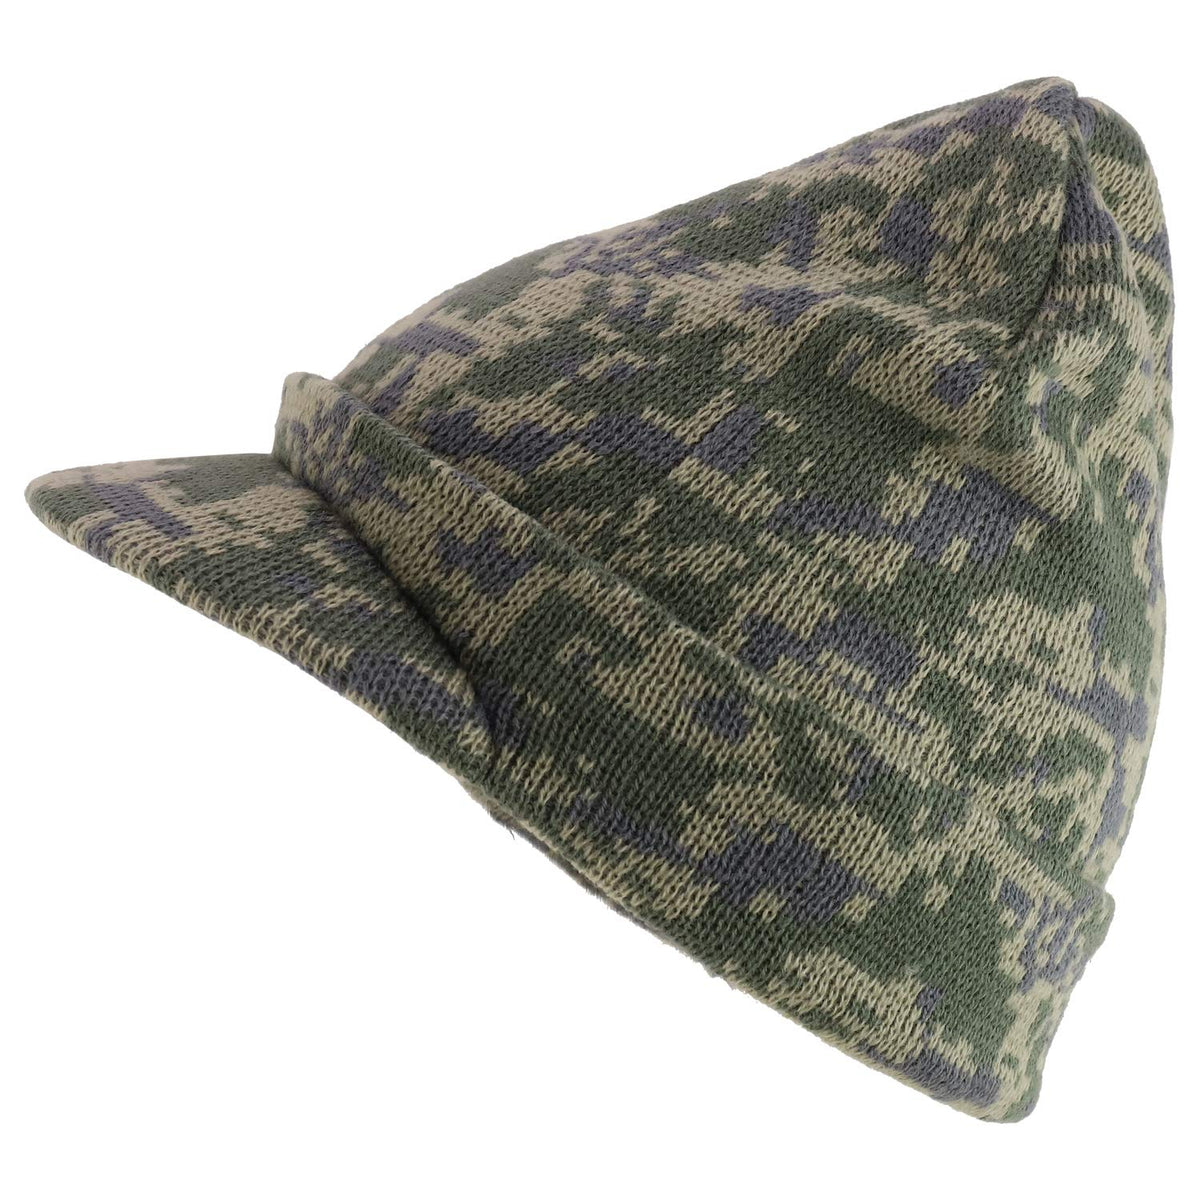 Armycrew Camouflage Knit Beanie Hat with Visor - UDG